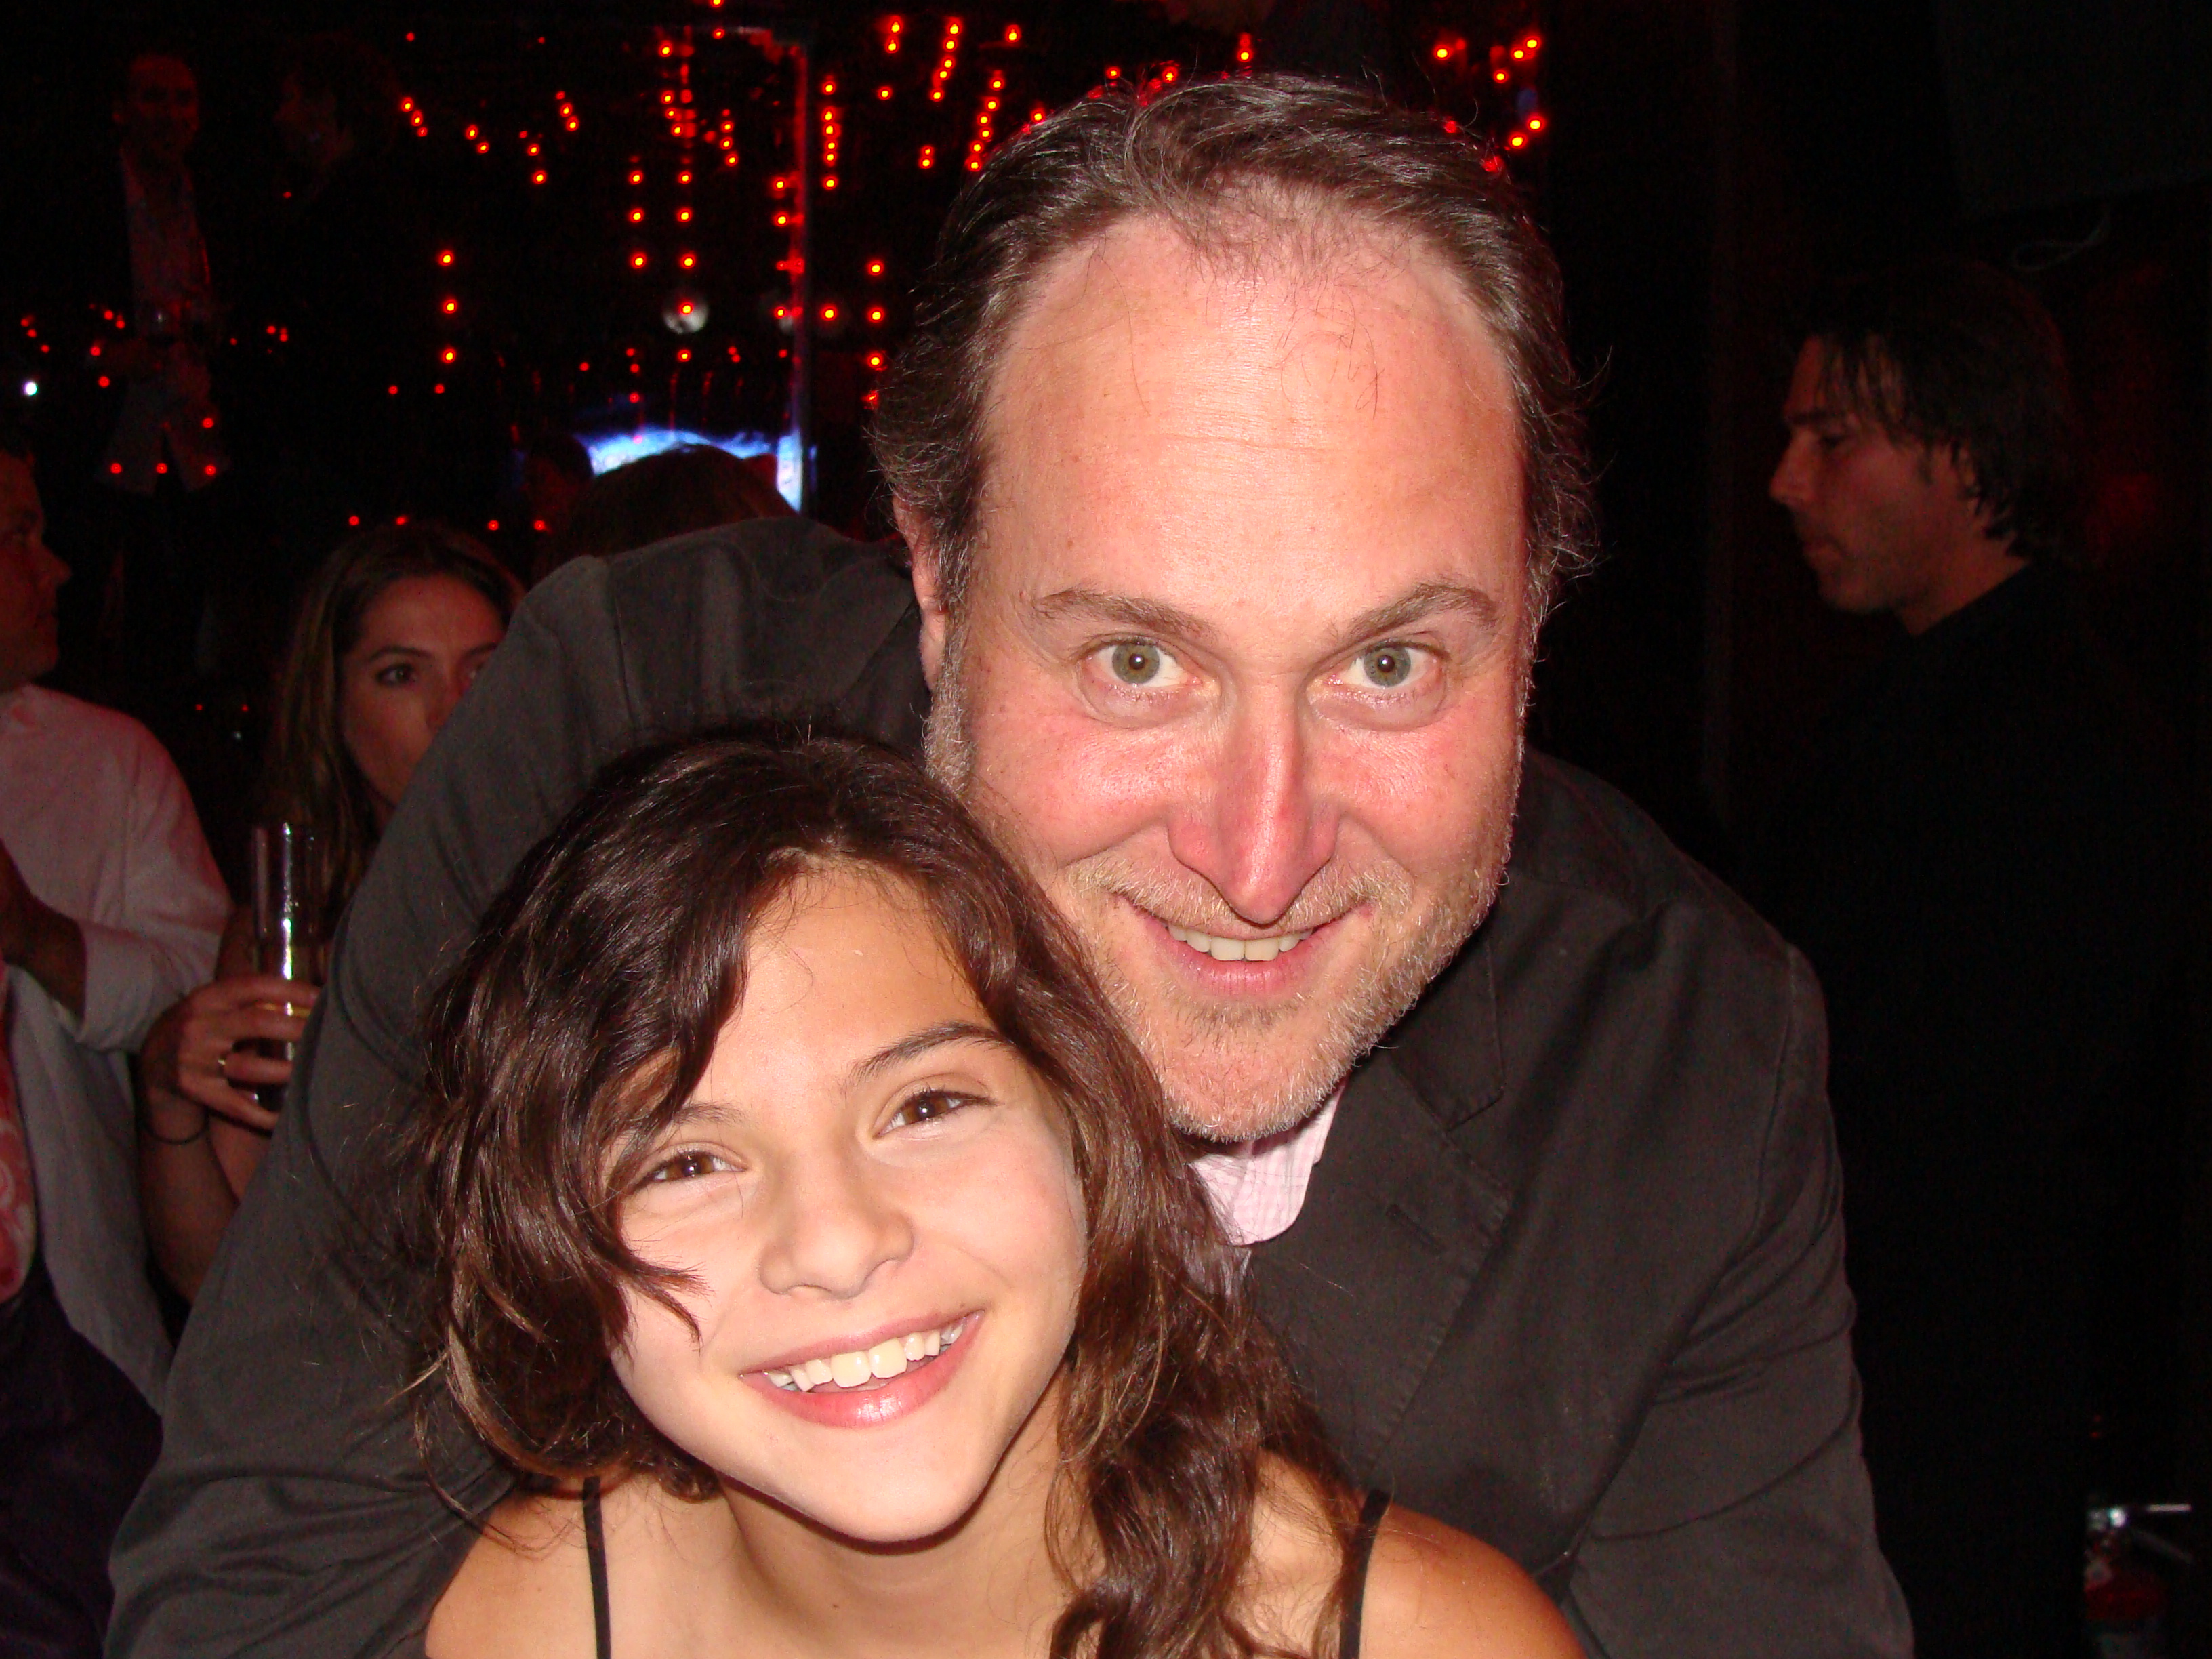 Nicole and Jon Turteltaub at the wrap party for Sorcerer's Apprentice